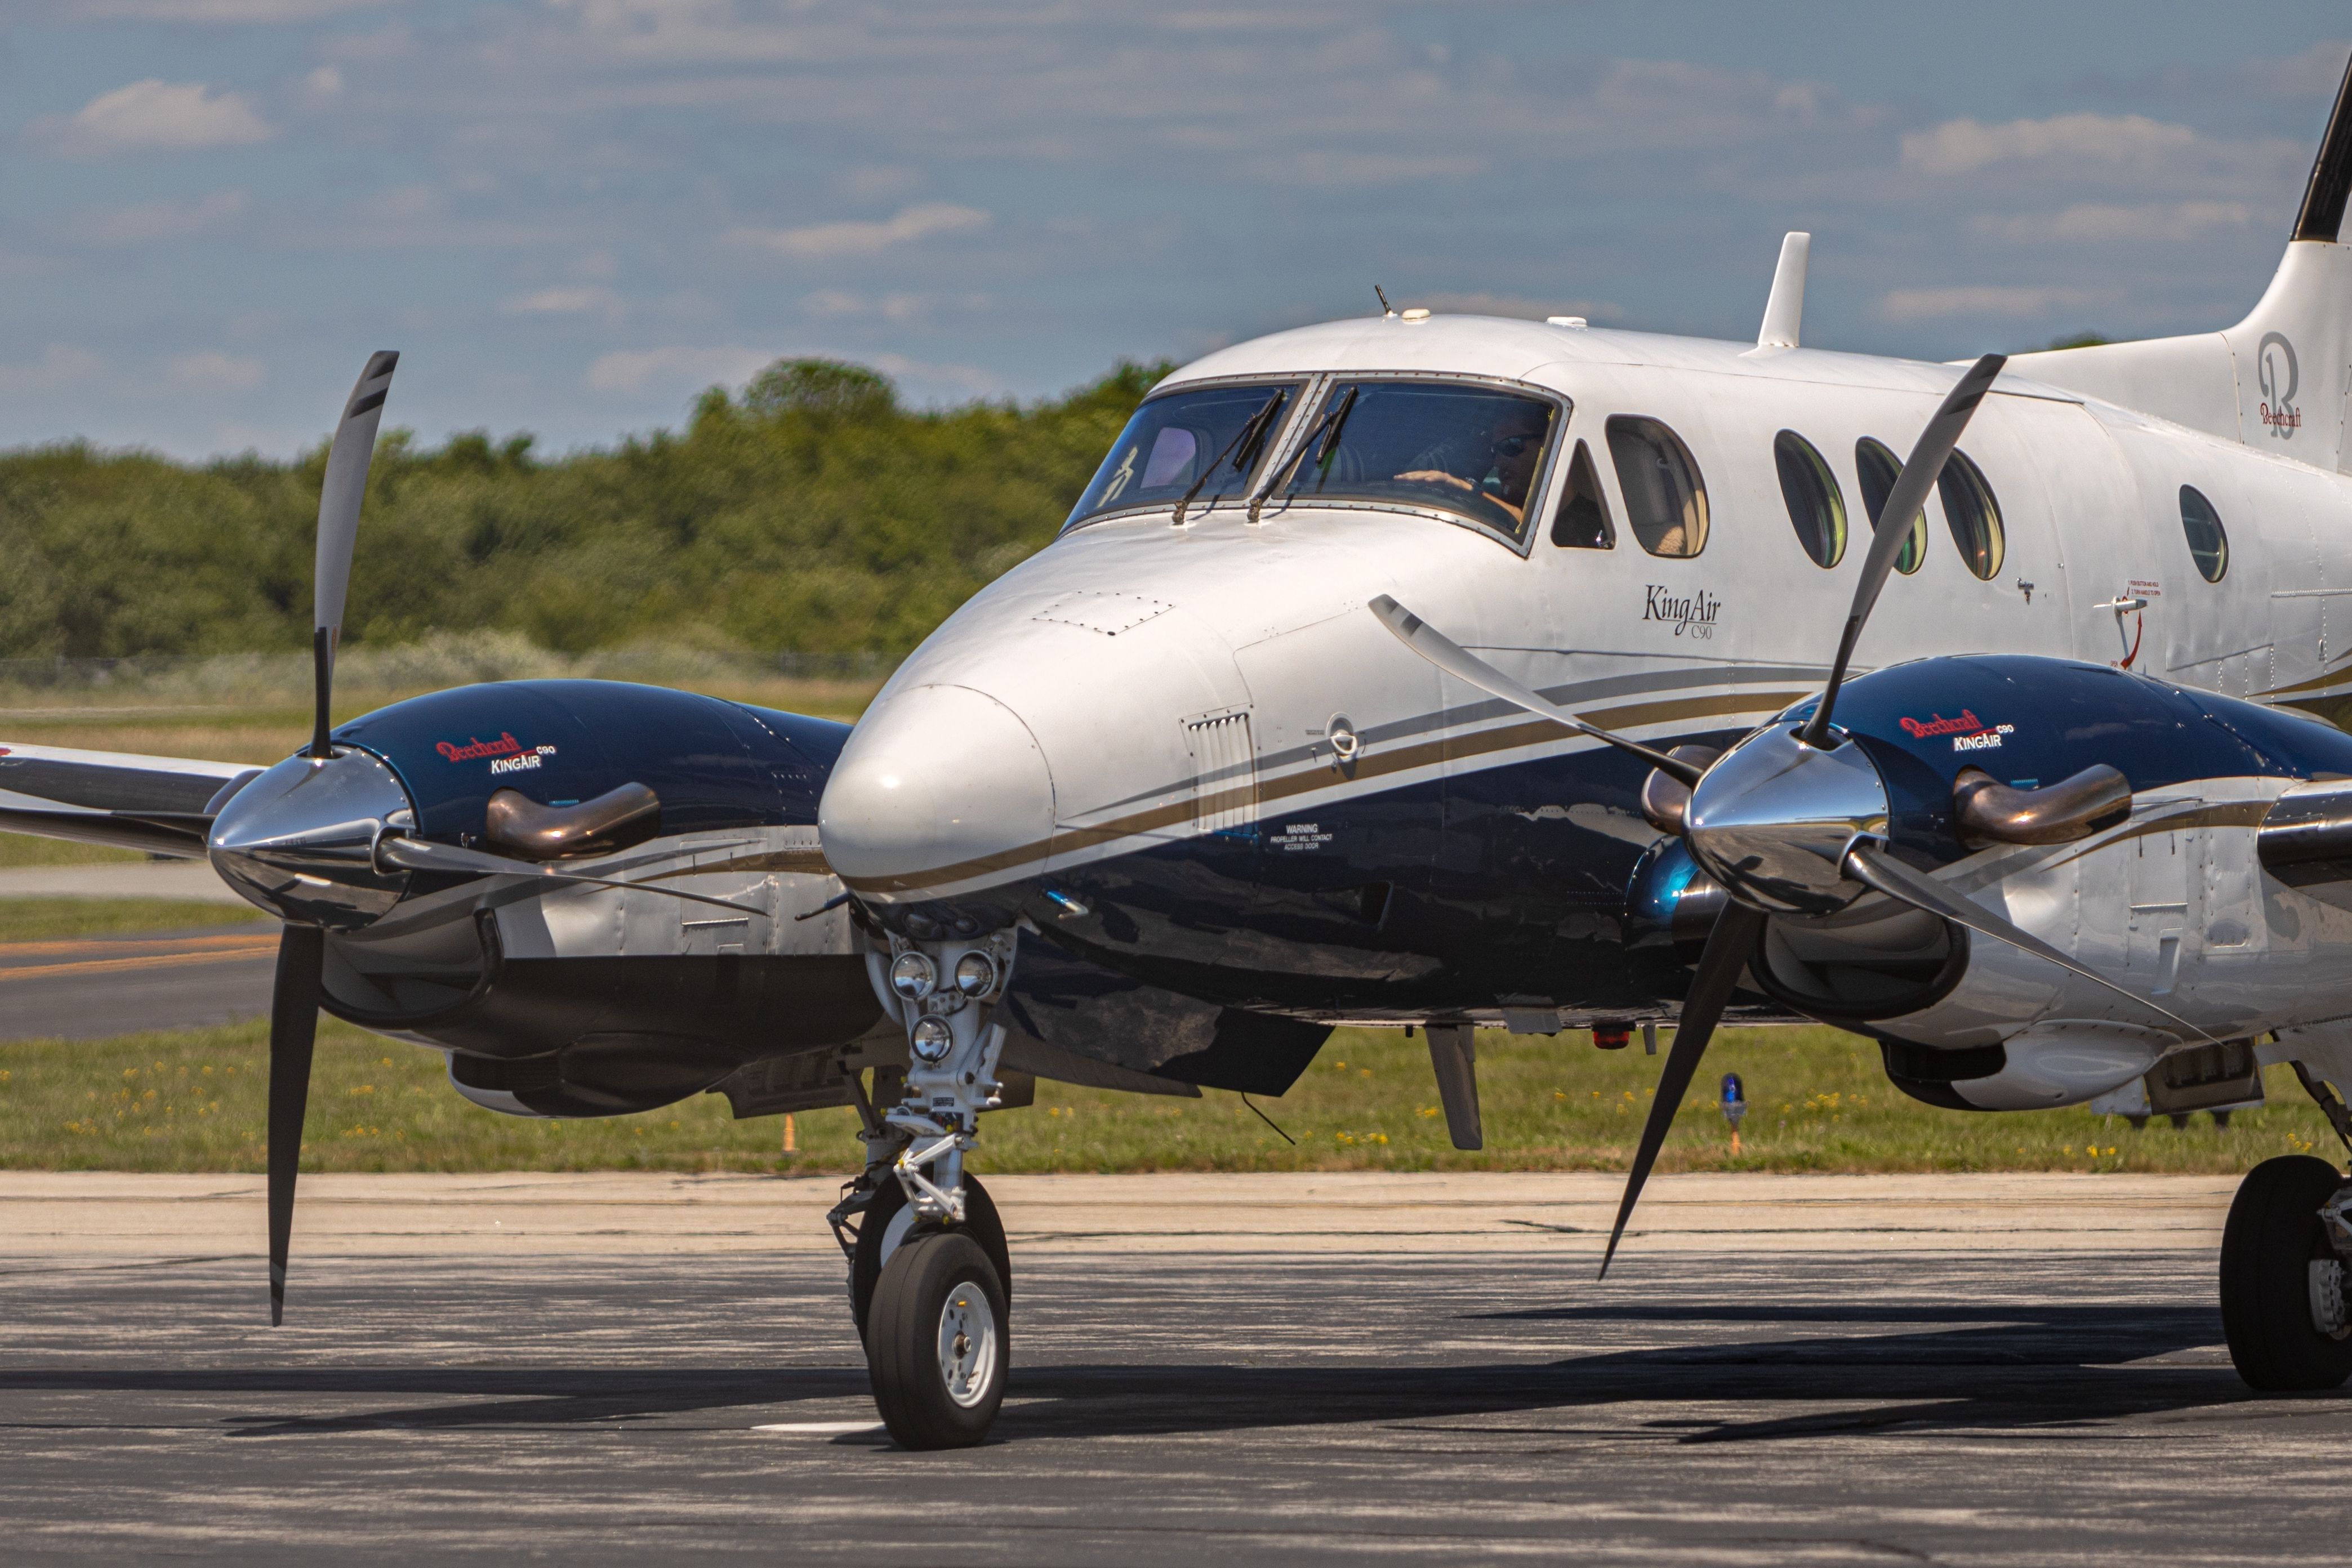 A Beechcraft King Air aircraft parked on an airport apron.